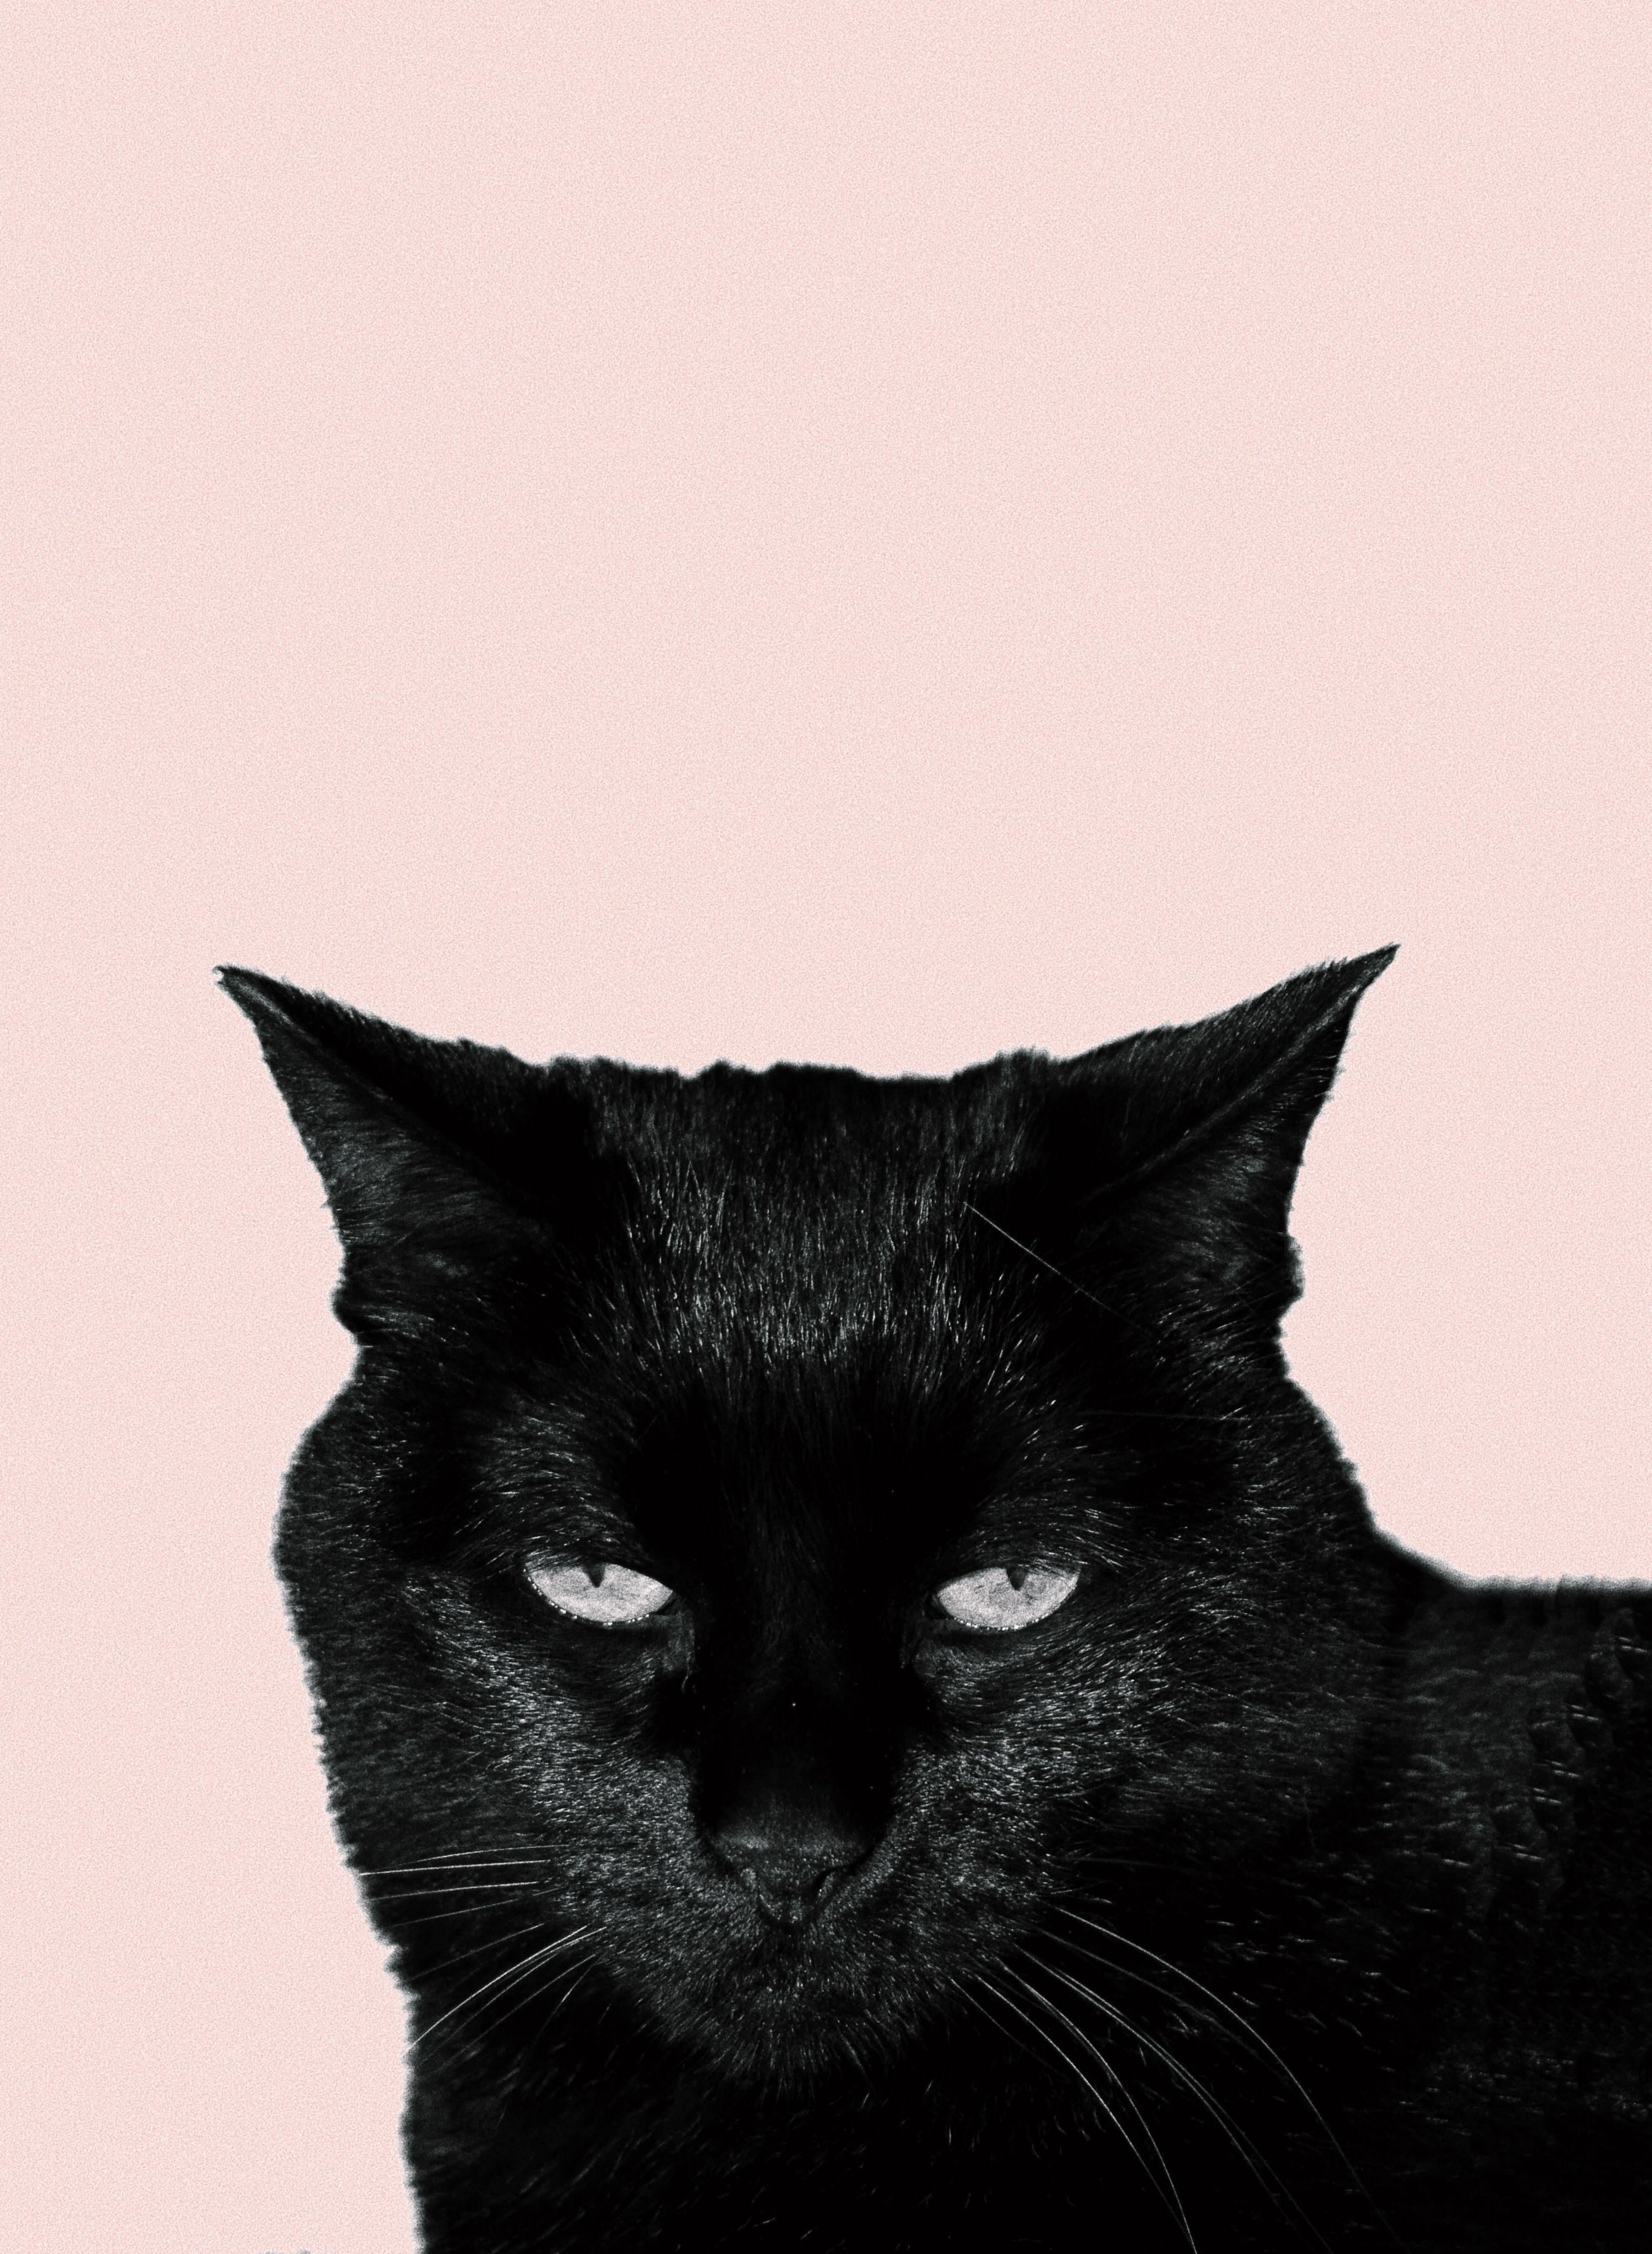 My Fianc Made A iPhone Wallpaper Of Her Photogenic Cat High